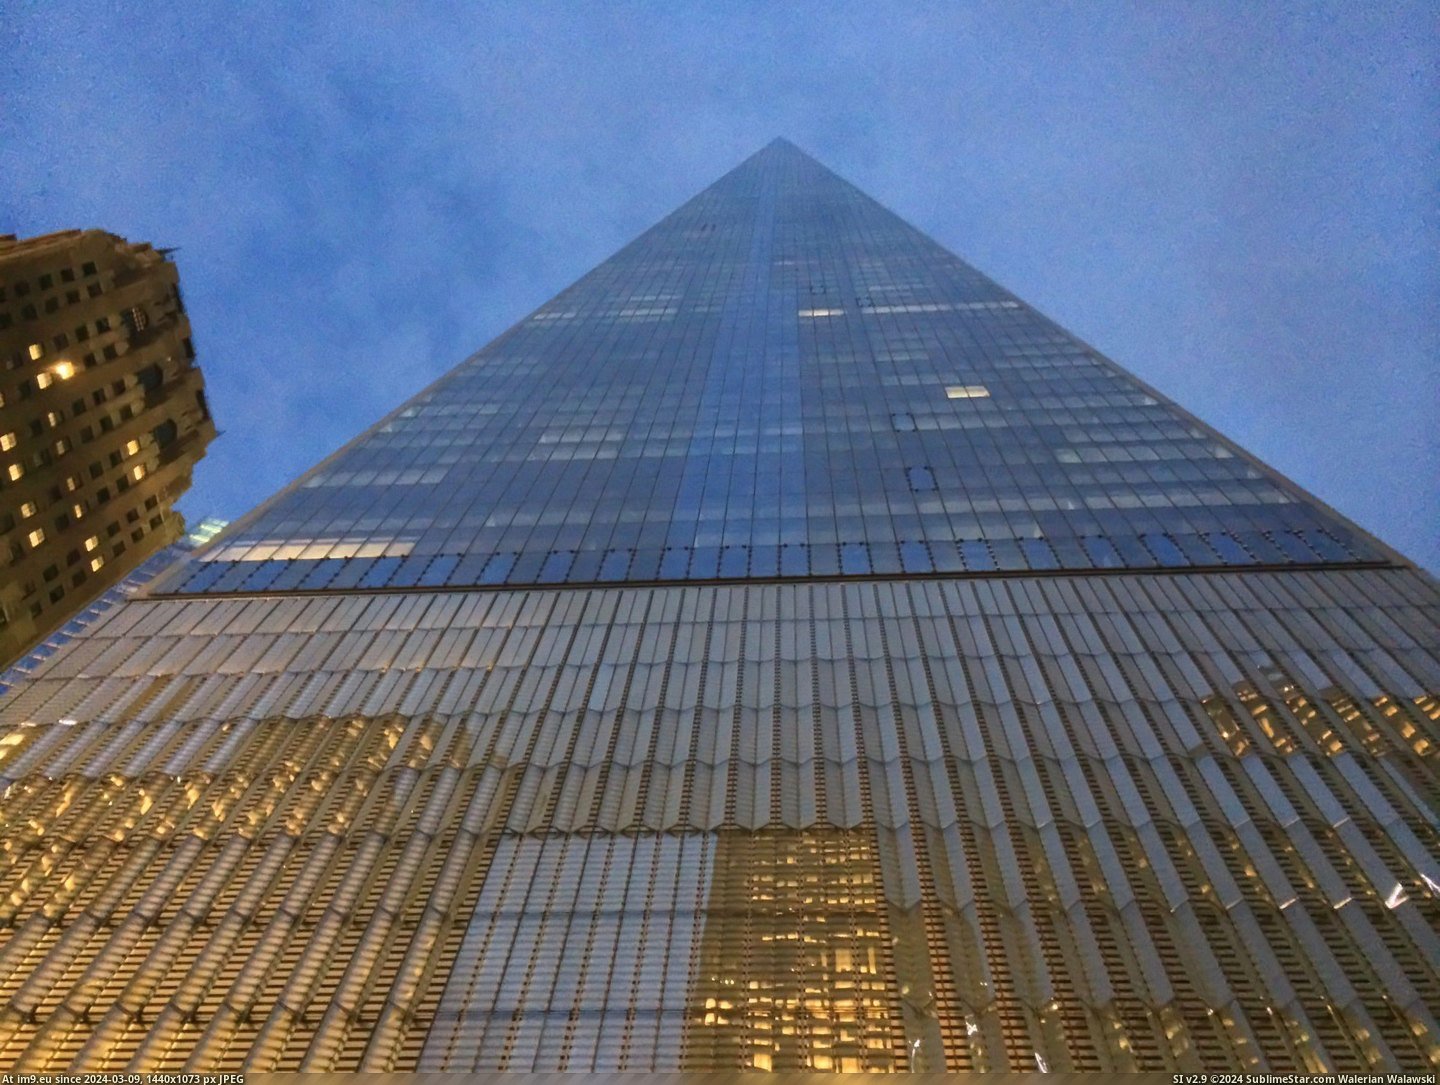 #One #World #Center #Freedom #Trade #Nyc #Tower [Mildlyinteresting] The new One World Trade Center (Freedom Tower) in NYC looks like it goes on forever when you're next to it Pic. (Obraz z album My r/MILDLYINTERESTING favs))